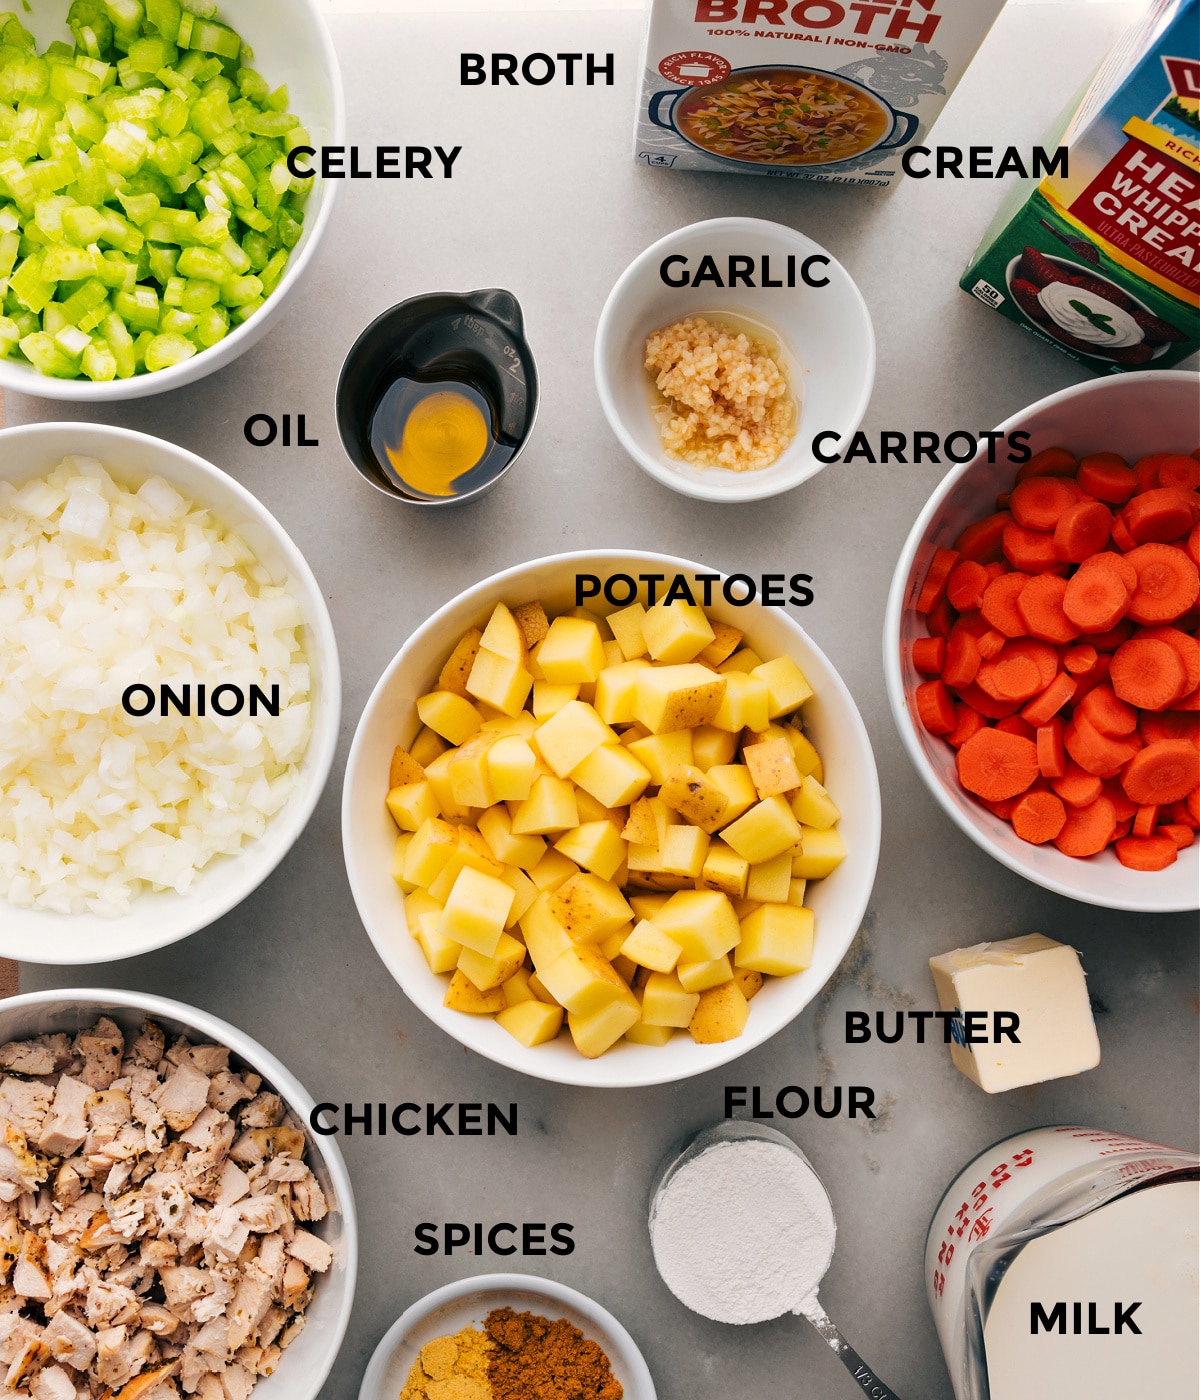 A selection of ingredients laid out for this recipe, including chopped potatoes, onions, carrots, spices, and more, ready to be used in making this recipe.